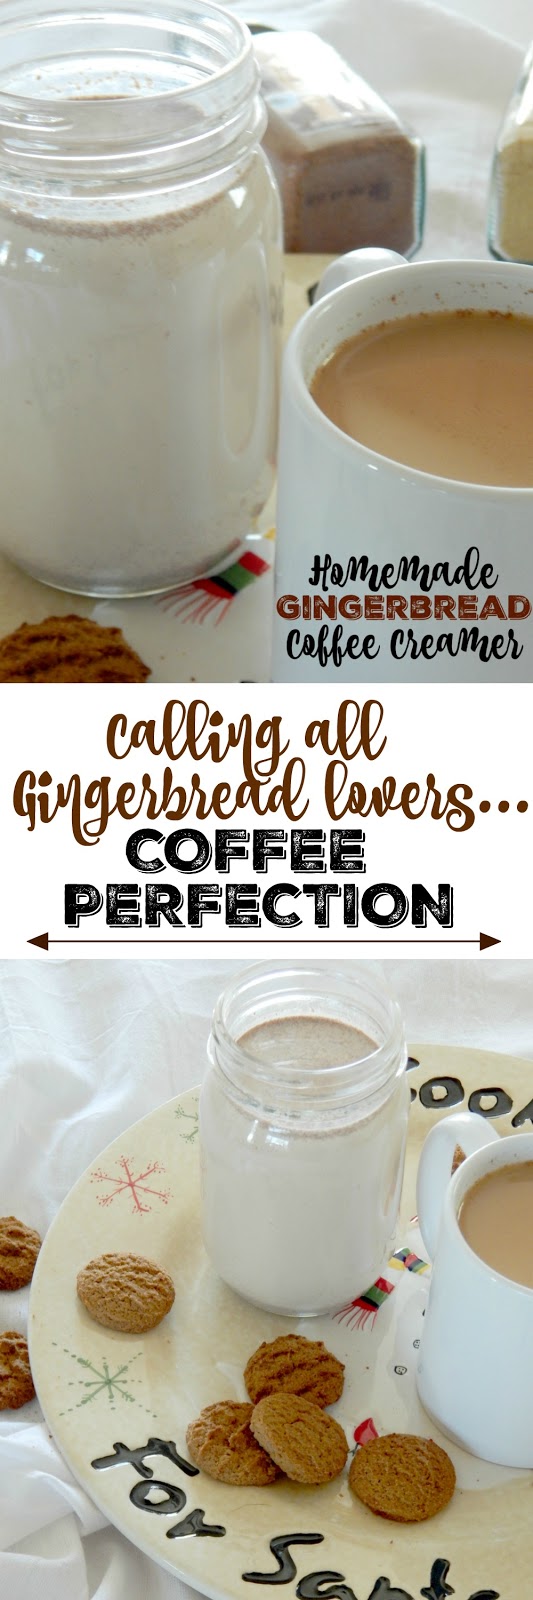 Homemade Gingerbread Coffee Creamer + Cuisinart Coffeemaker Giveaway...this is the flavored coffee creamer of the holiday season!  Tasting just like a gingerbread cookie, full of cinnamon, ginger, nutmeg and more - make a jar for the month of December! (sweetandsavoryfood.com)